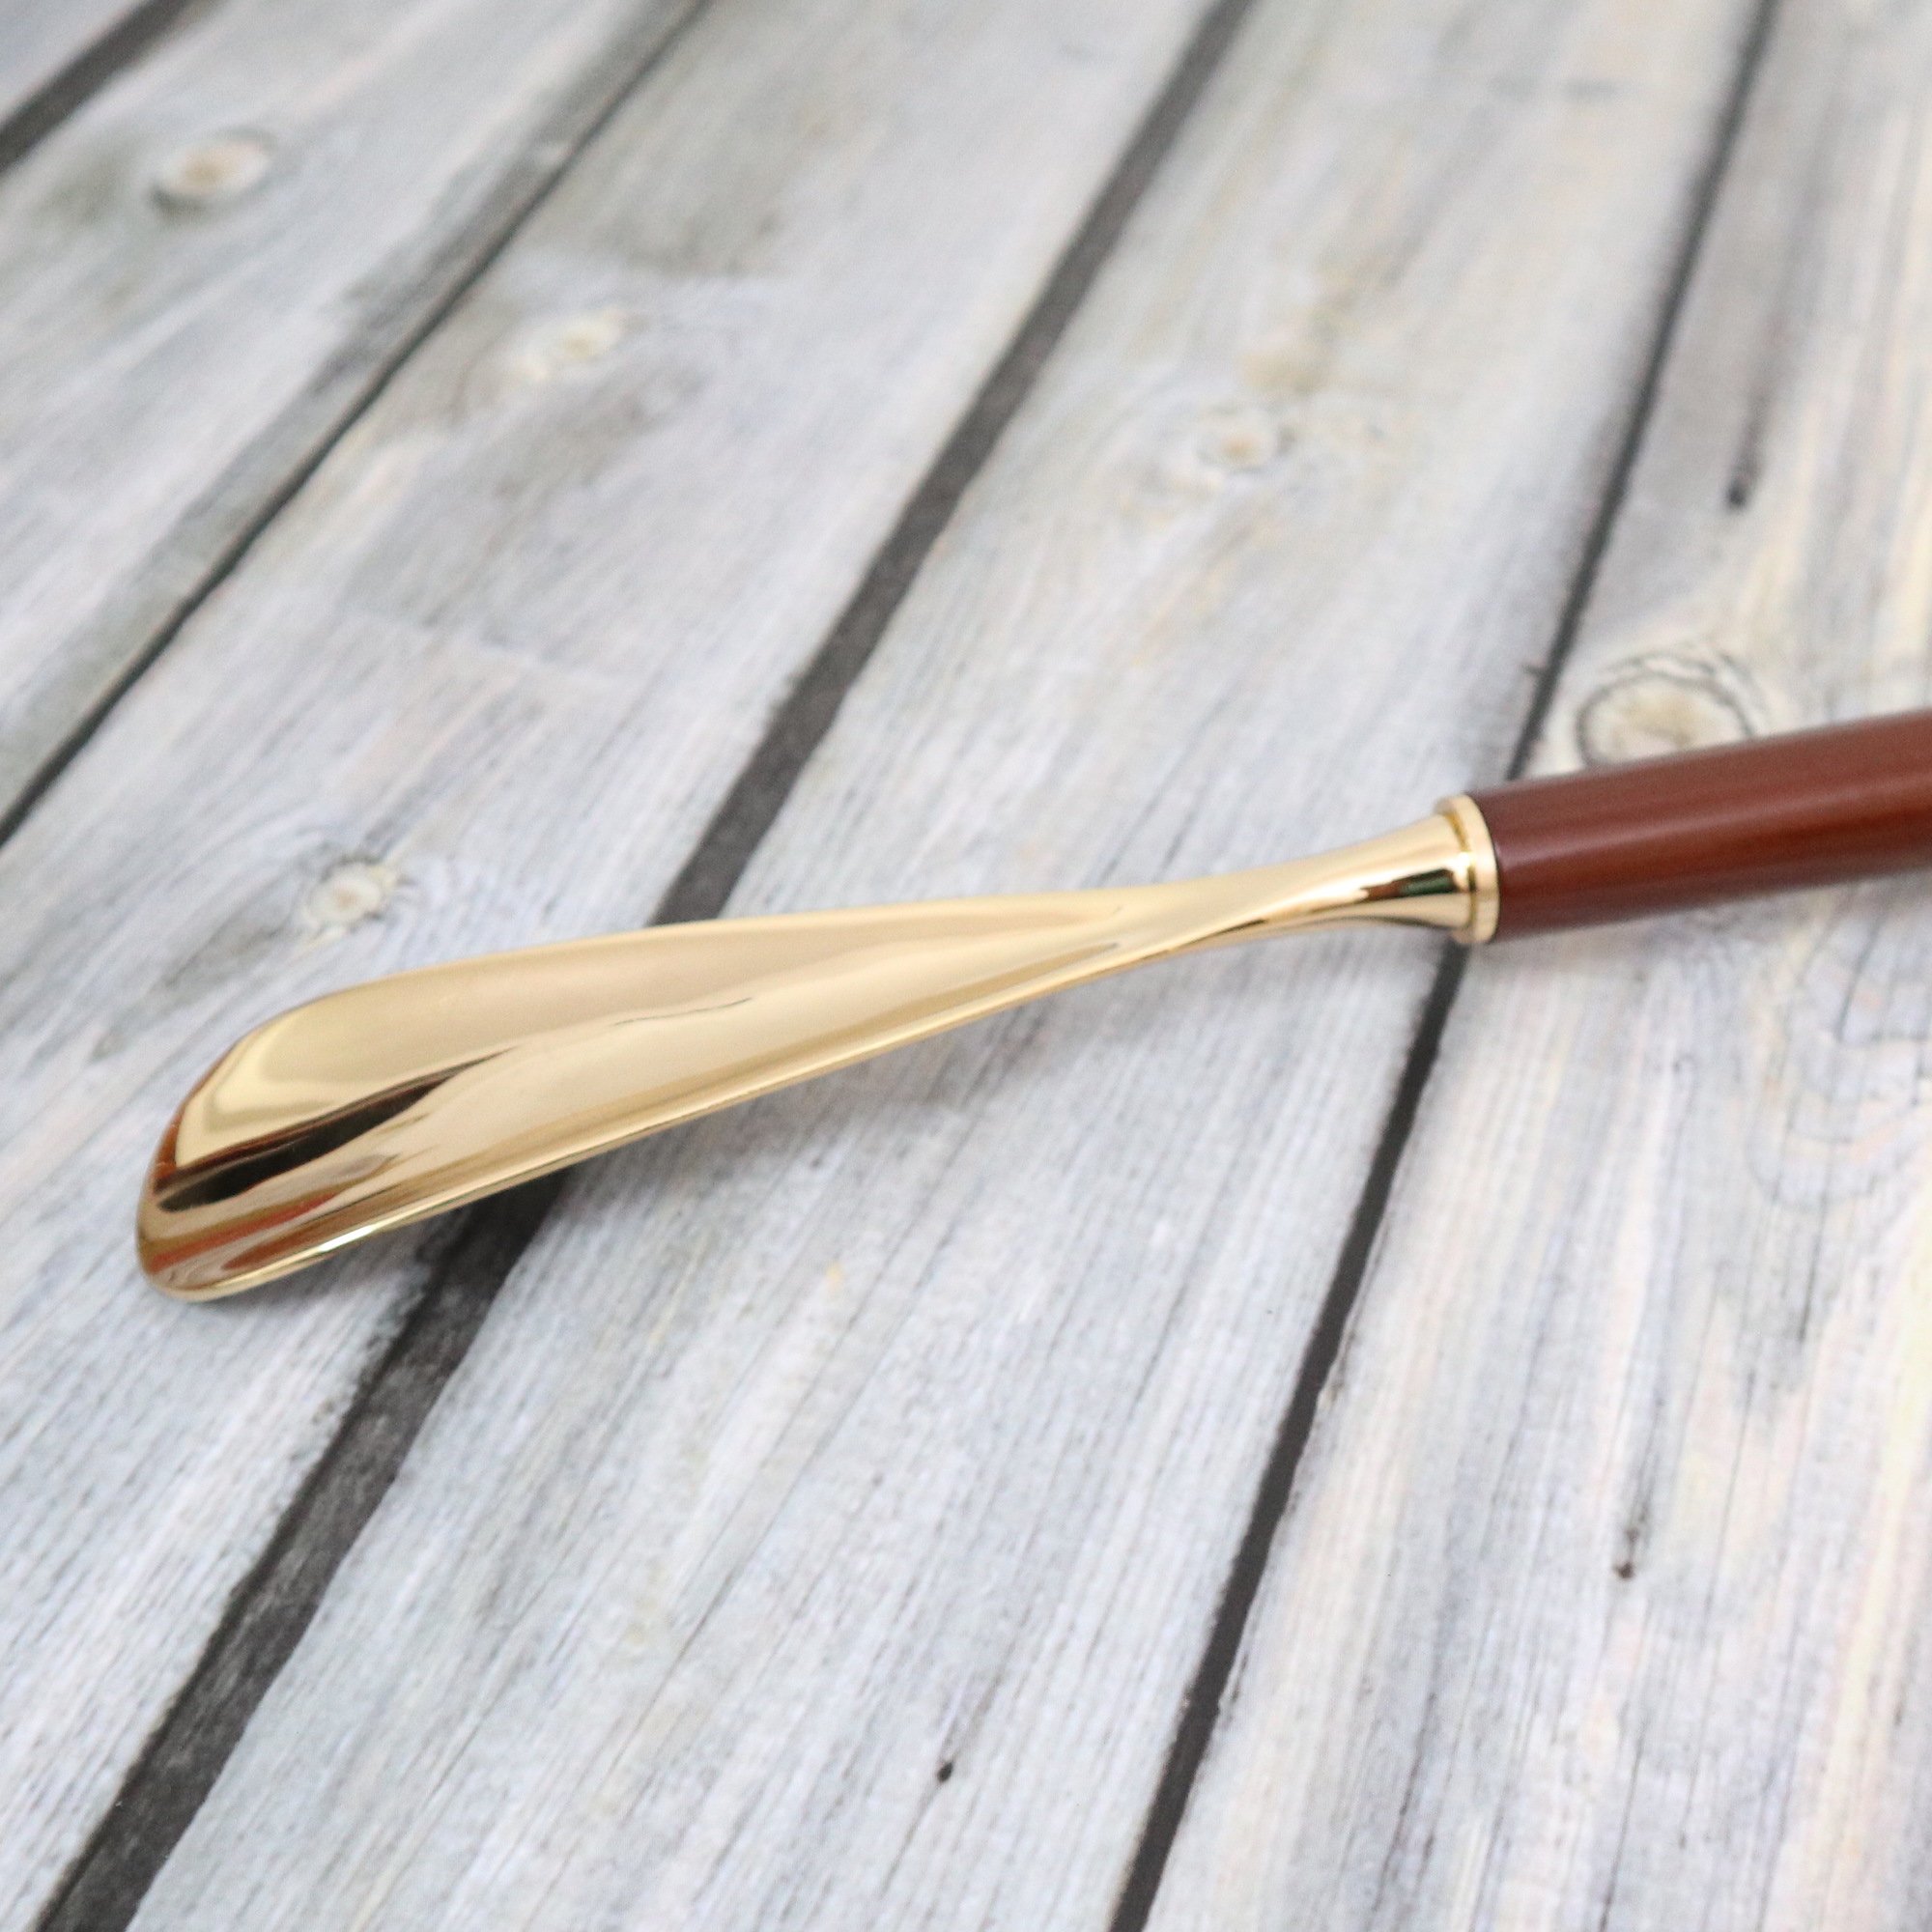 54cm by Hennesy Long Shoe Horn Polished Beech Wood 